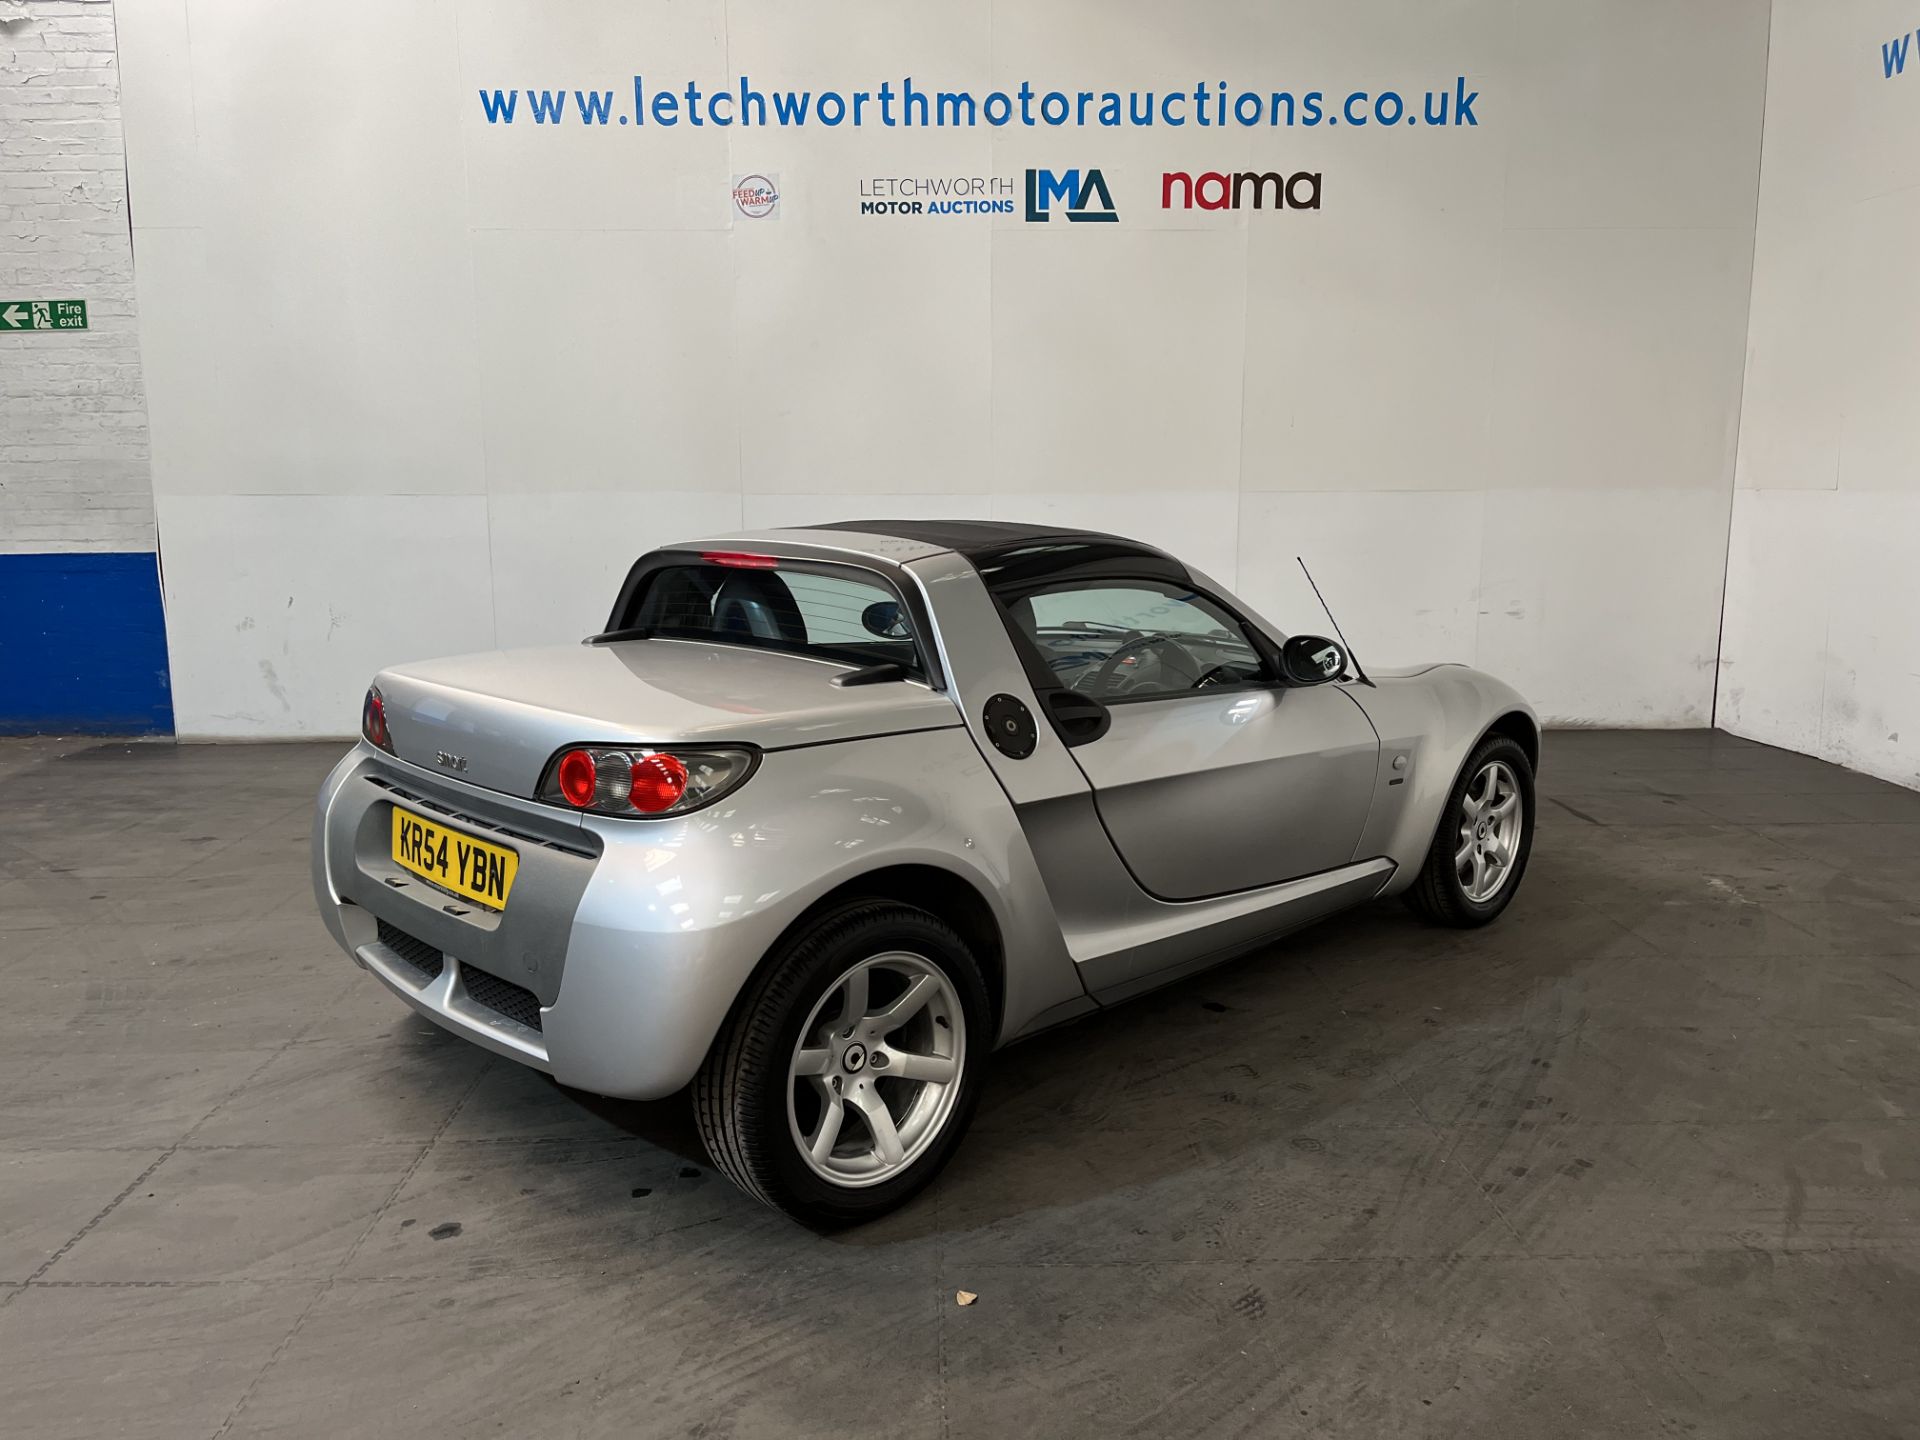 2004 Smart Roadster Speedsilver Auto - 698cc - Image 11 of 22